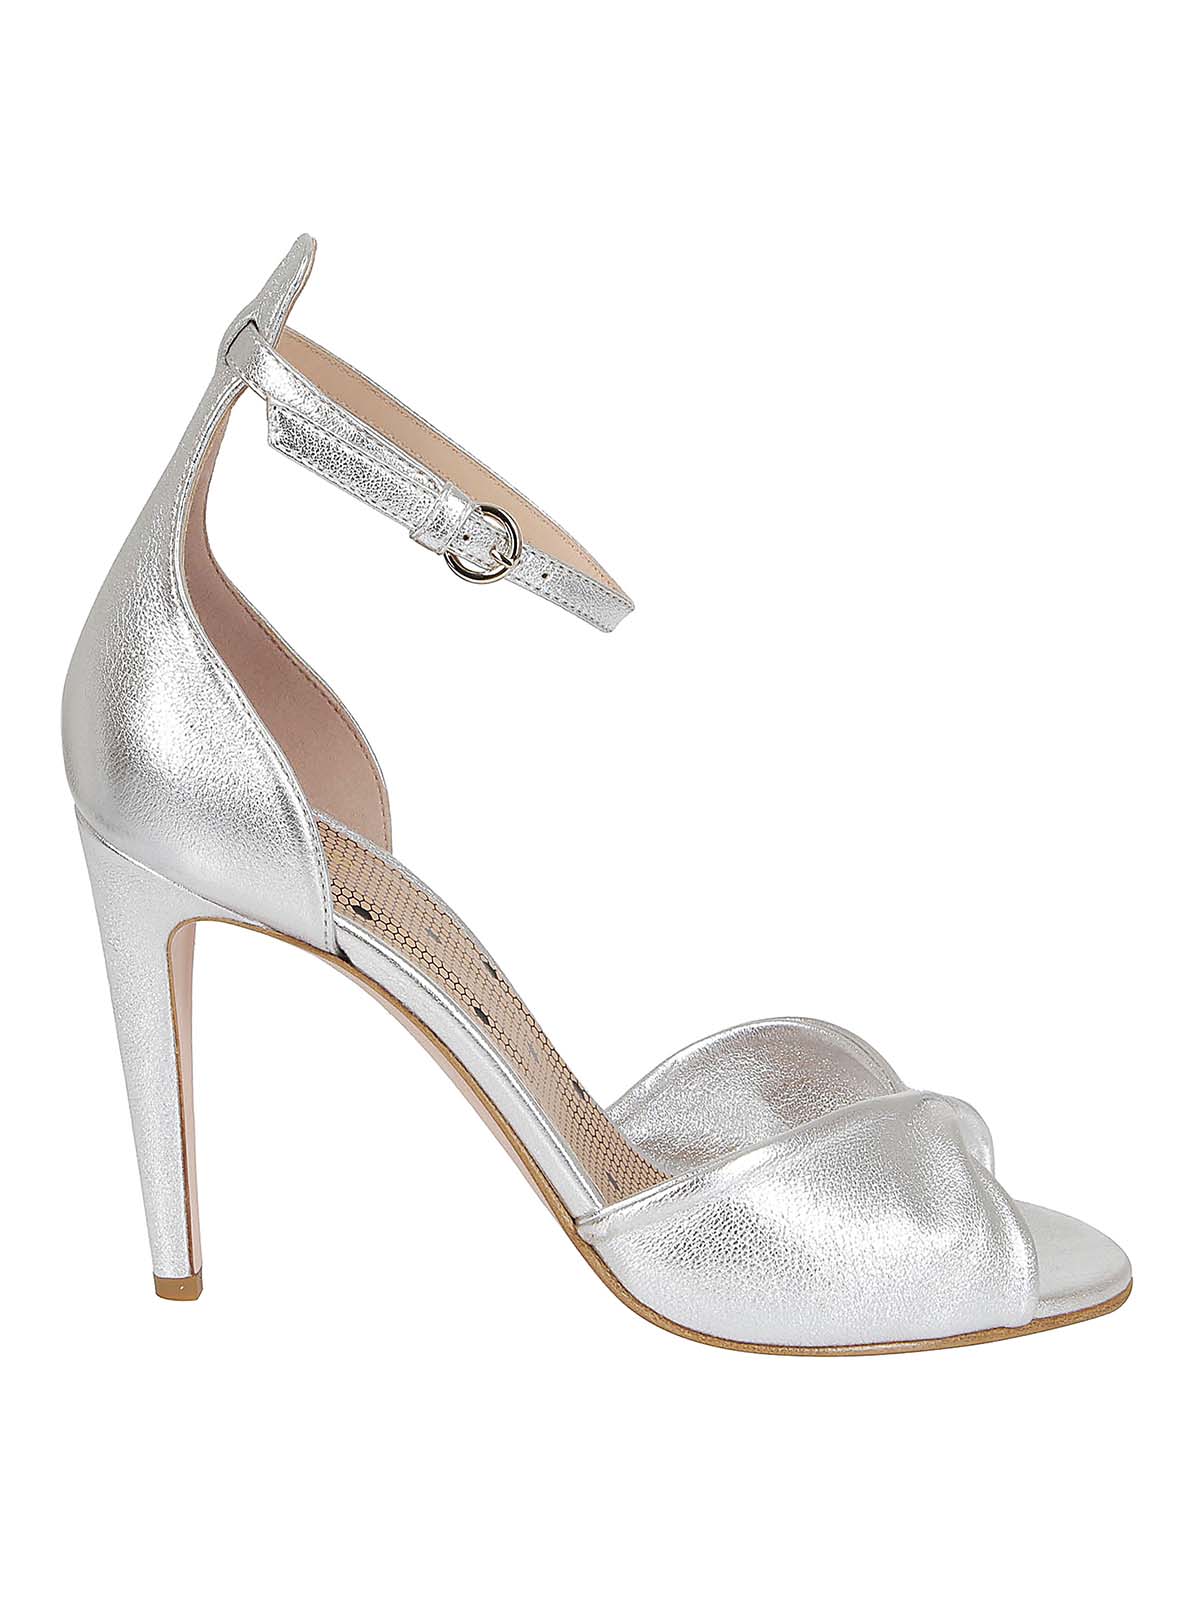 RED VALENTINO SILVER-TONE LEATHER SANDALS